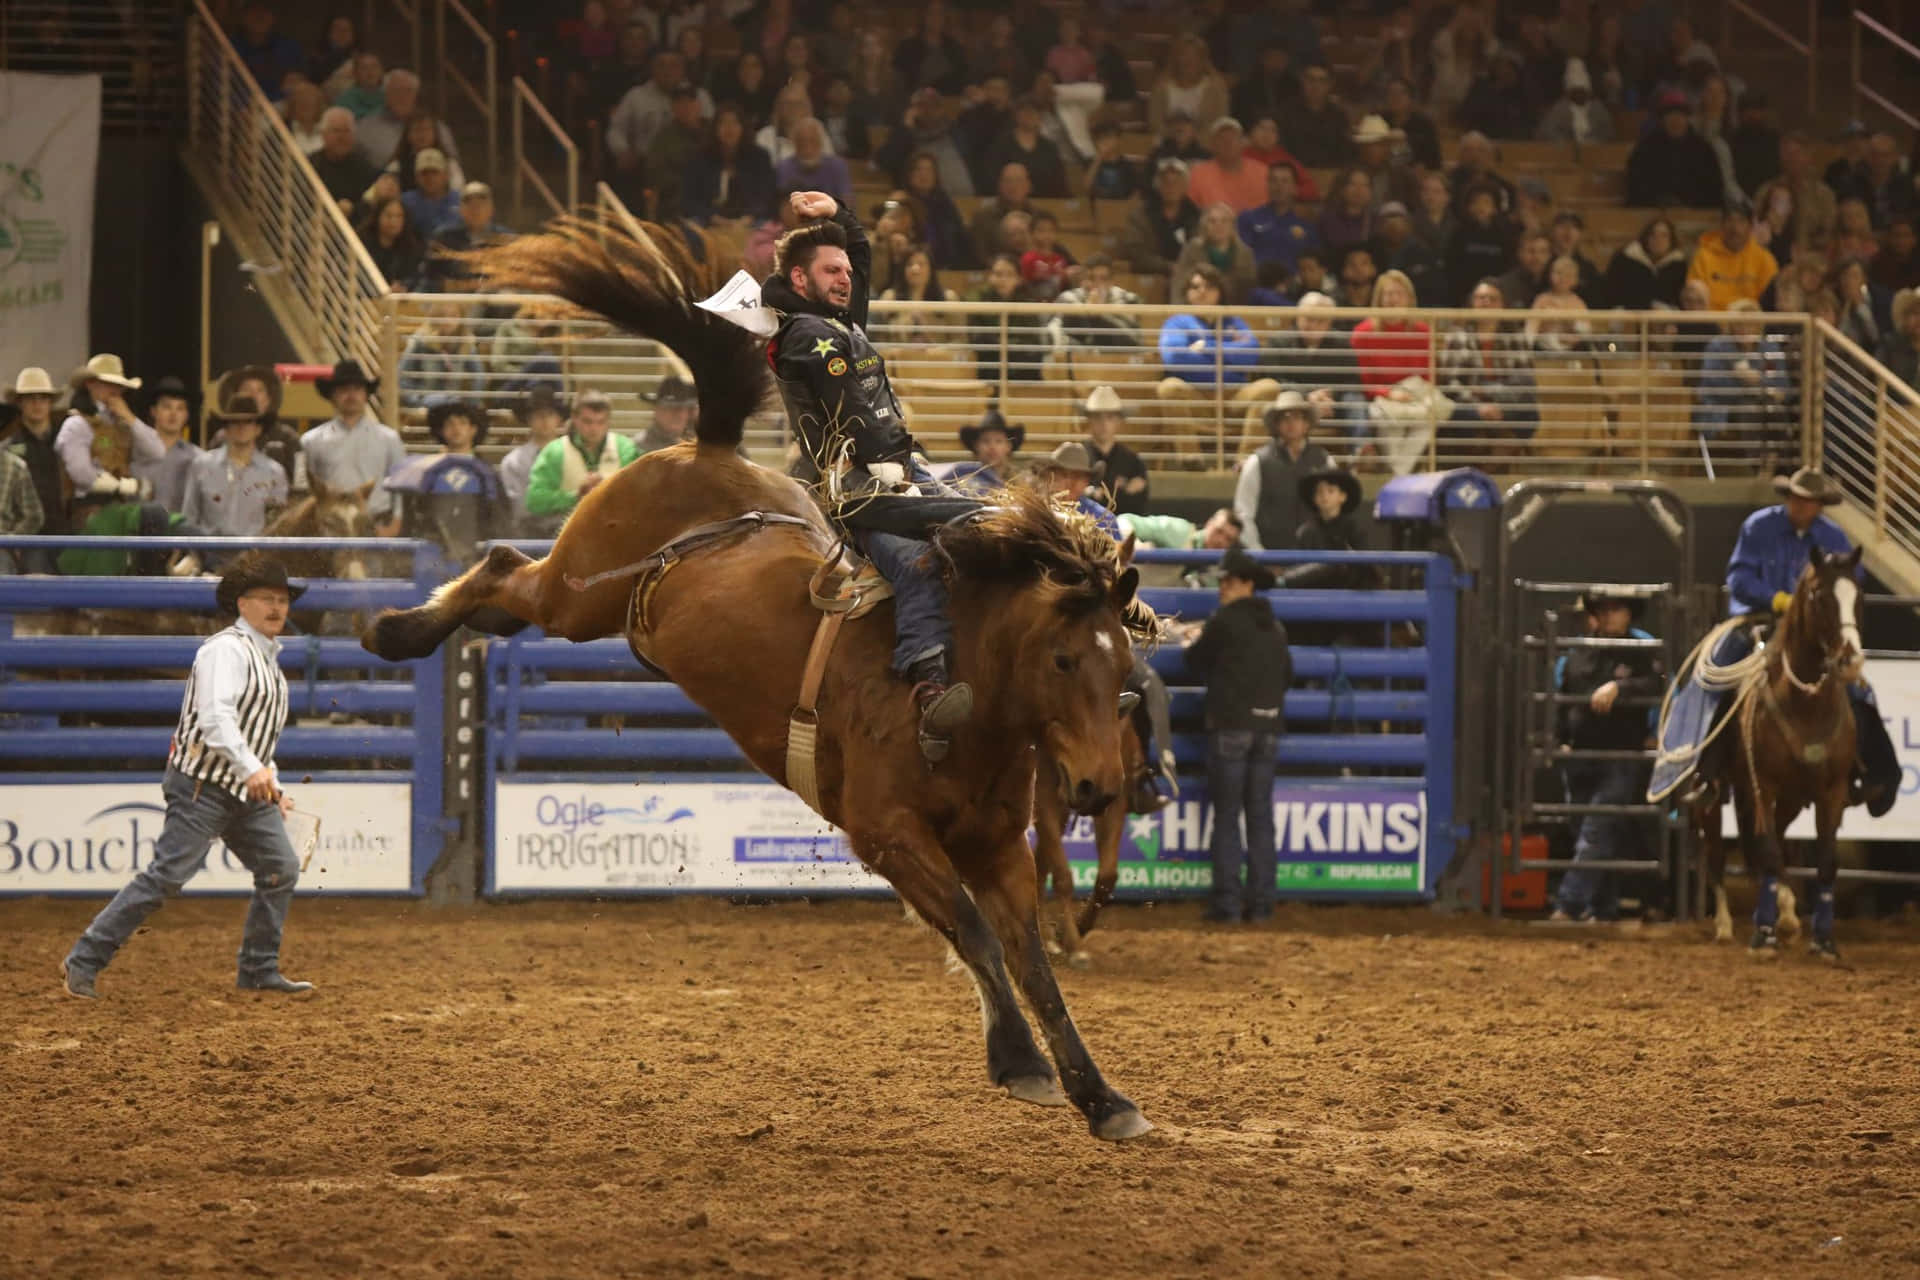 Step right up to the wild rodeo show!